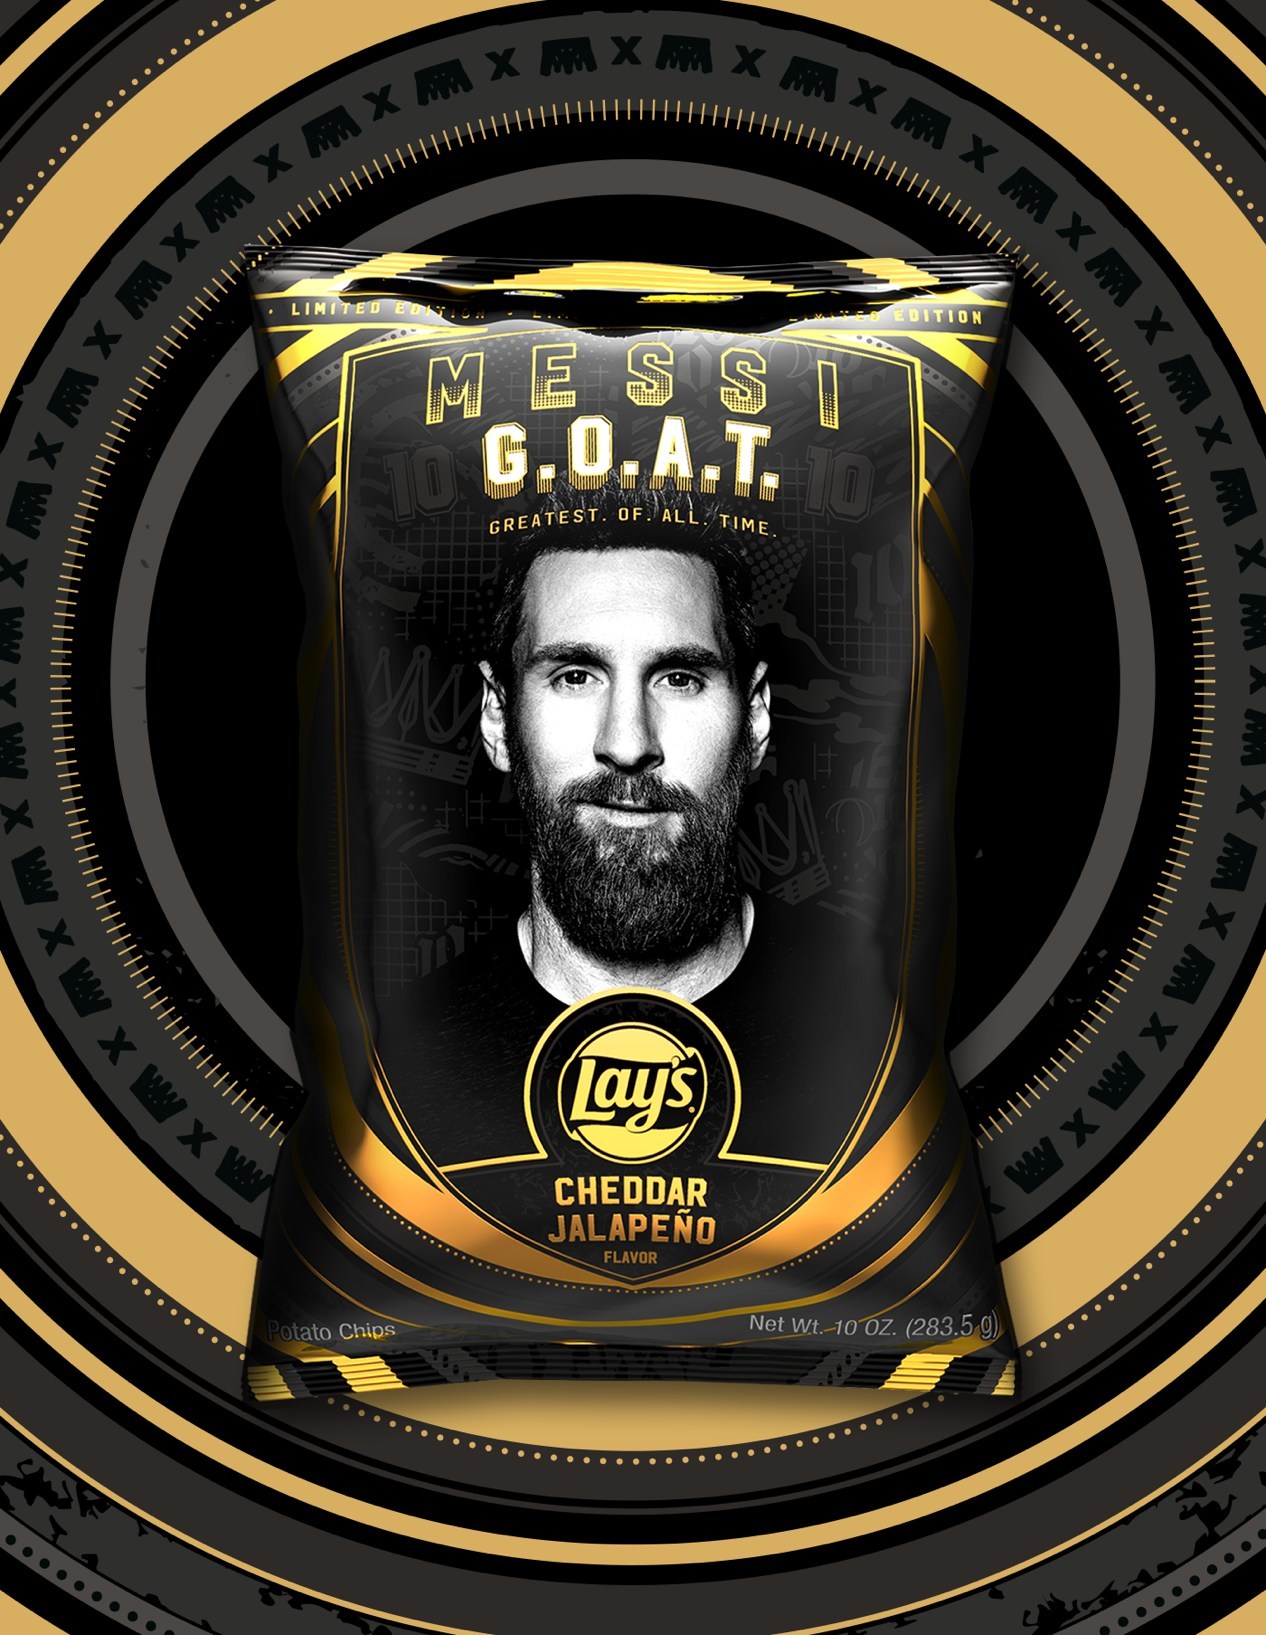 messi goat cheese champions league